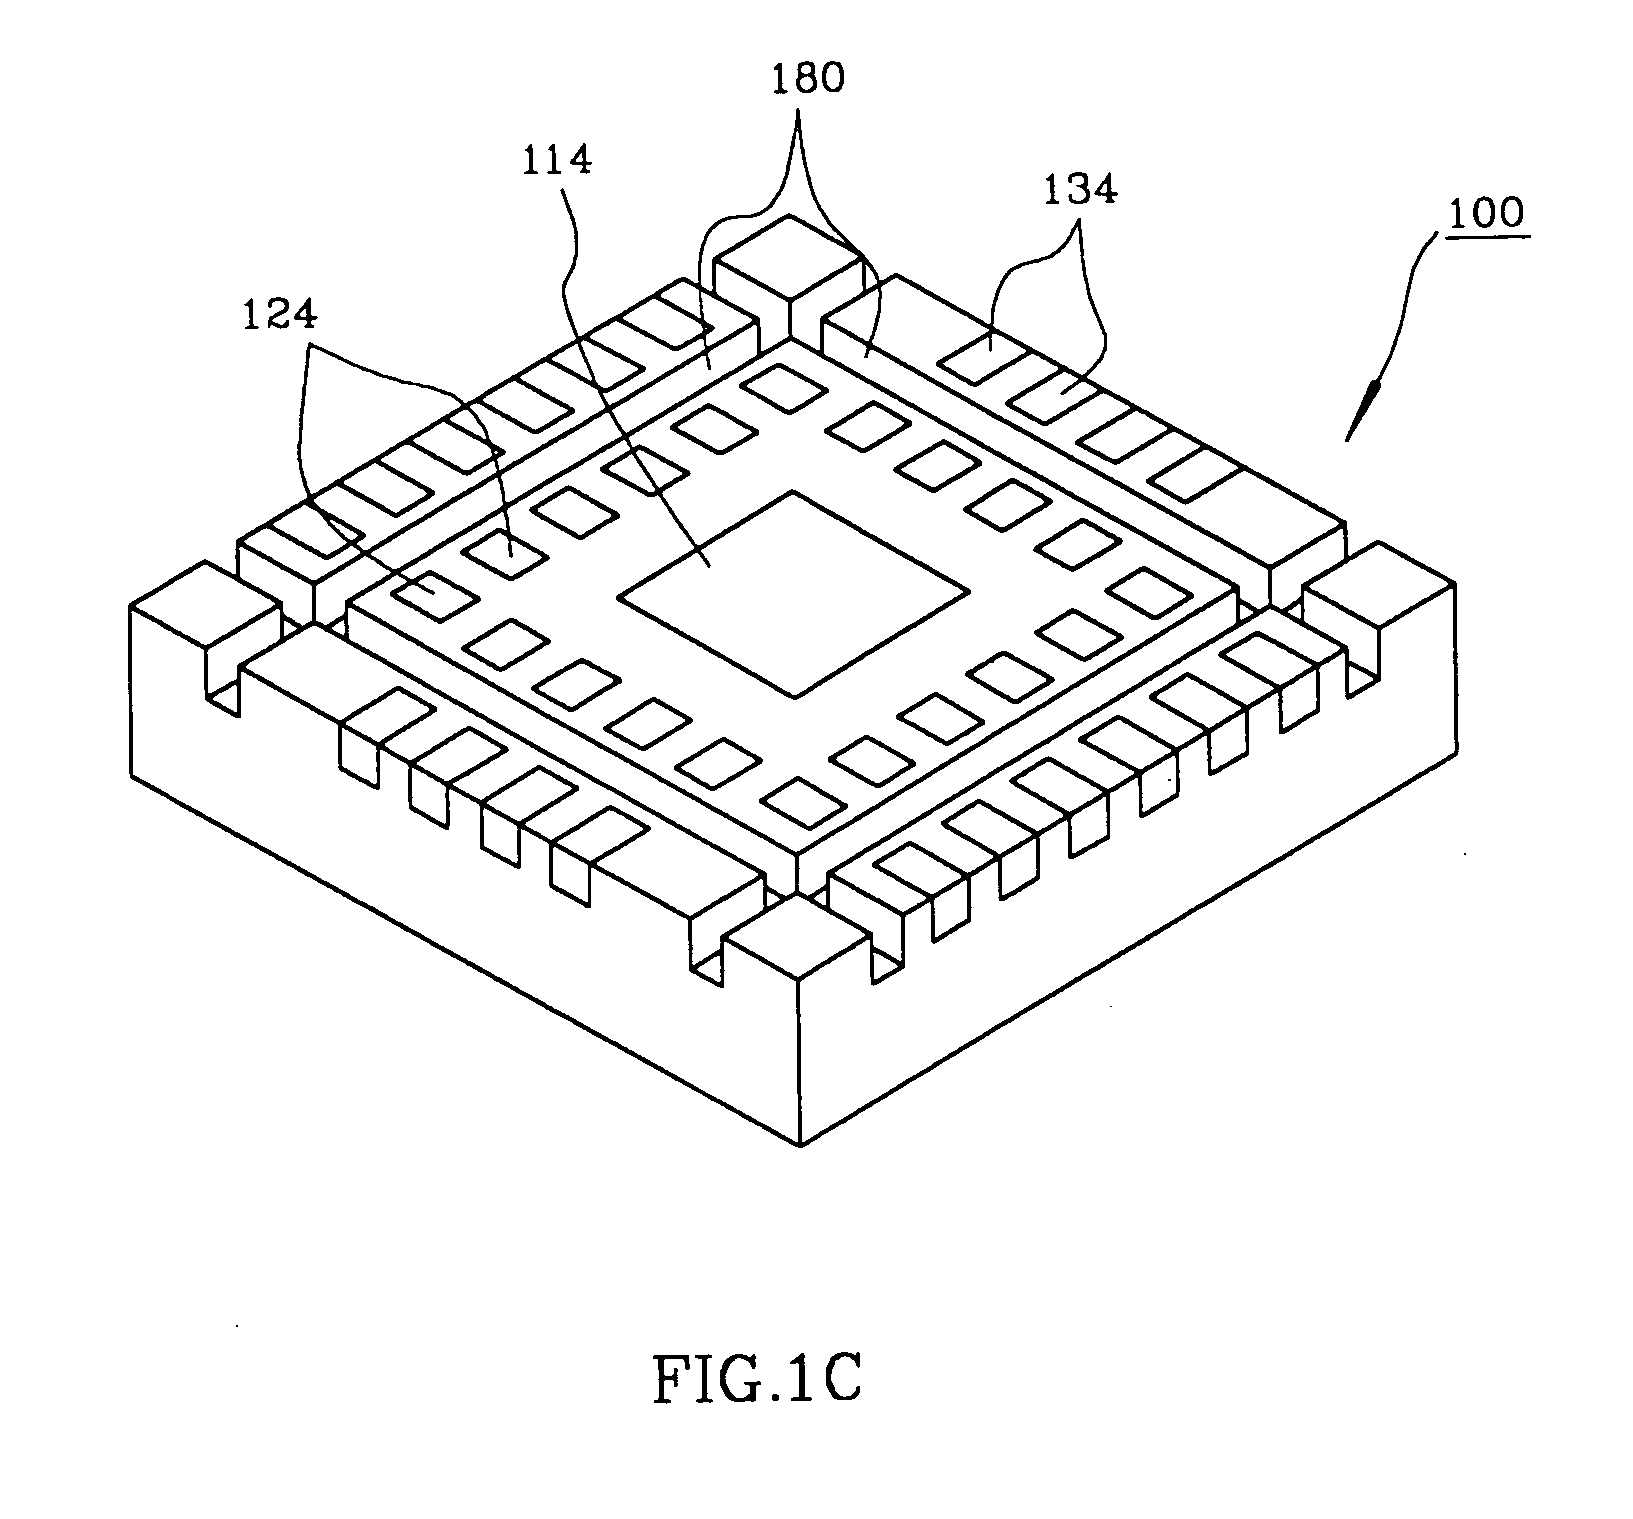 Semiconductor package exhibiting efficient lead placement